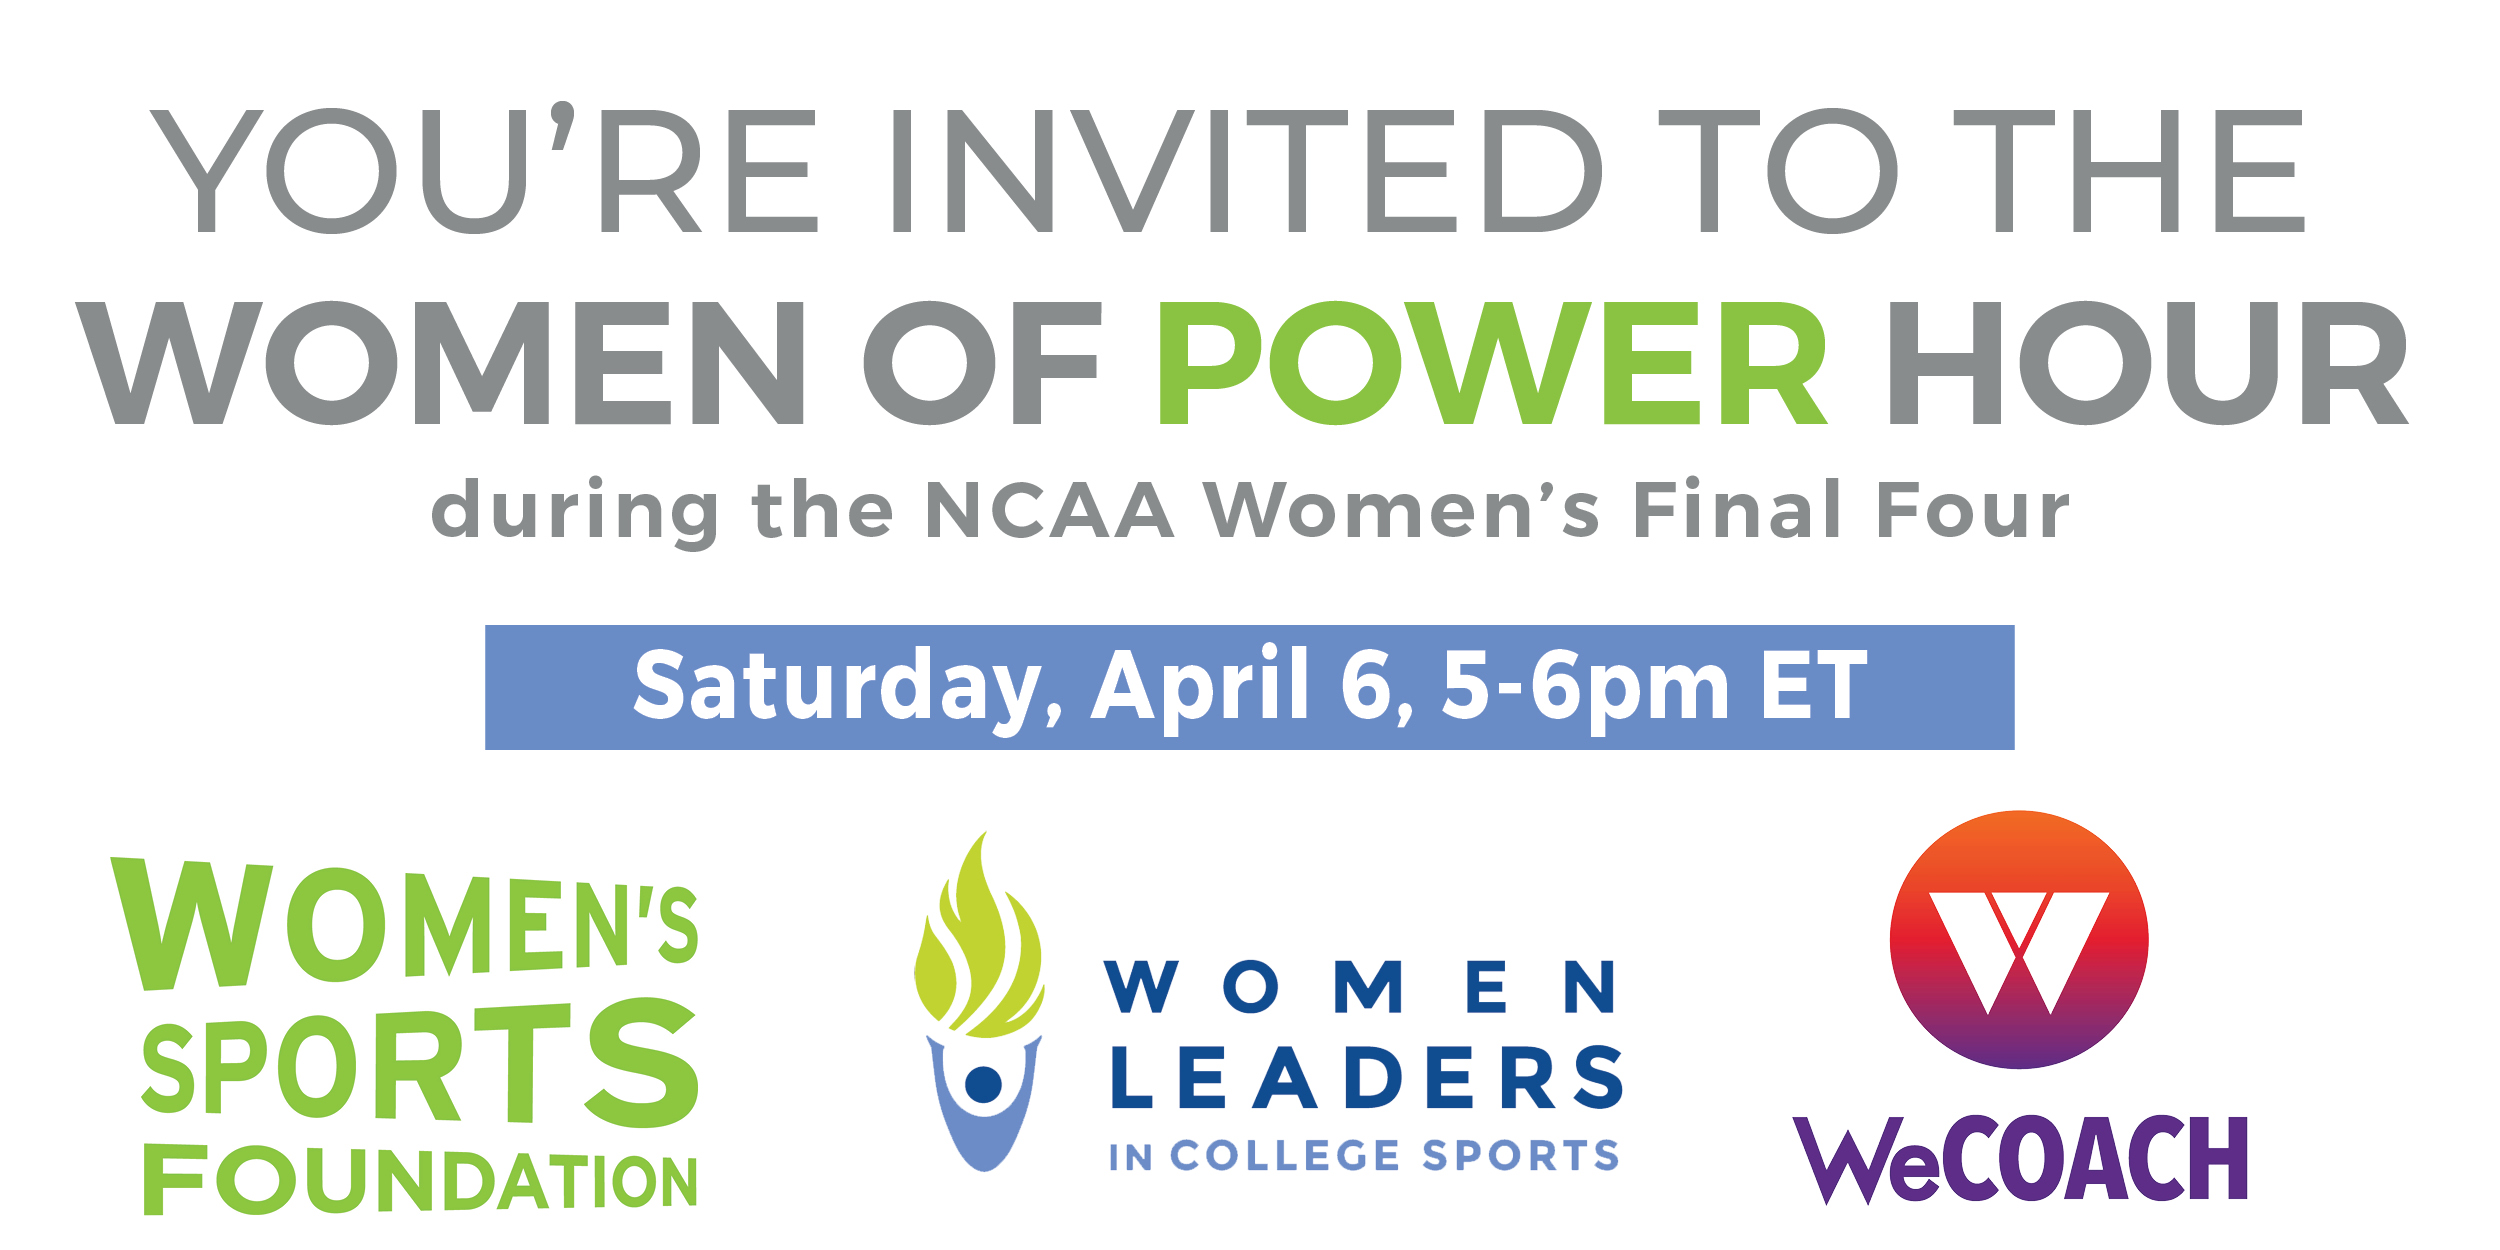 Women of Power Hour at the Women's Final Four